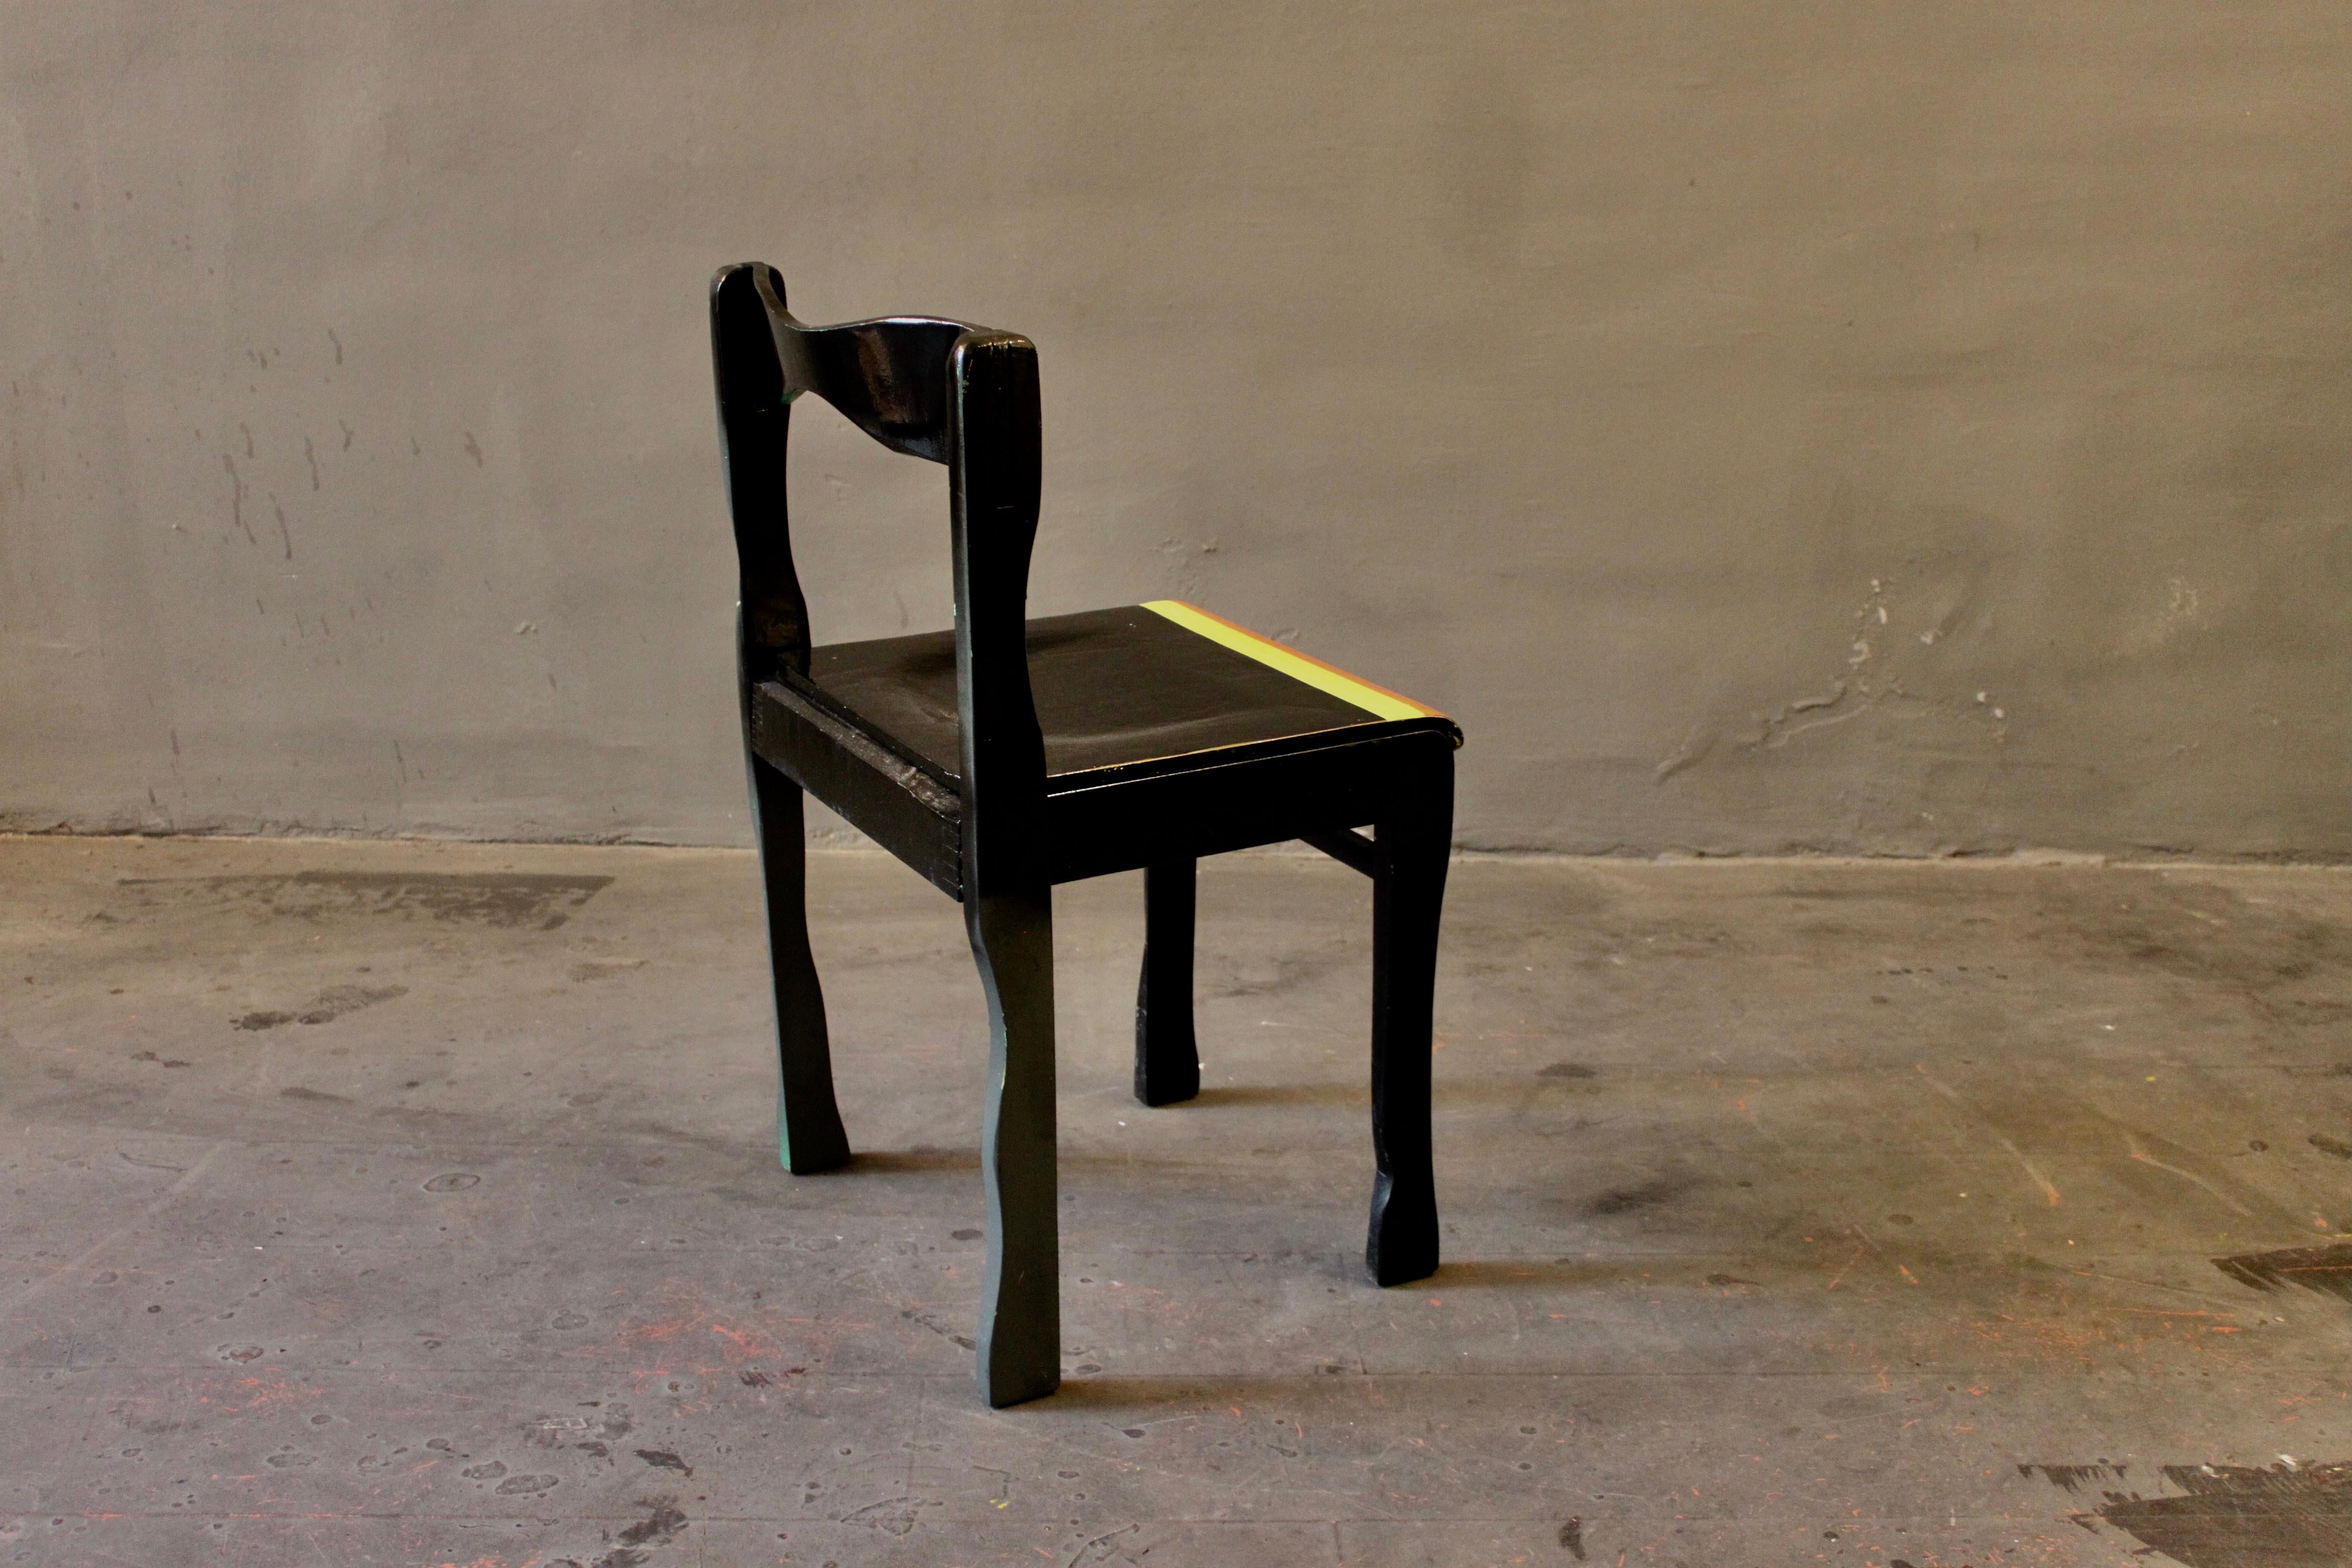 Classic mid-century chair, re-shaped, painted and multi-lacquered. A typical early work by Markus Friedrich Staab and a perfect functional art work.

Through my work I transform each chair into a unique and individual object. Chairs that once were